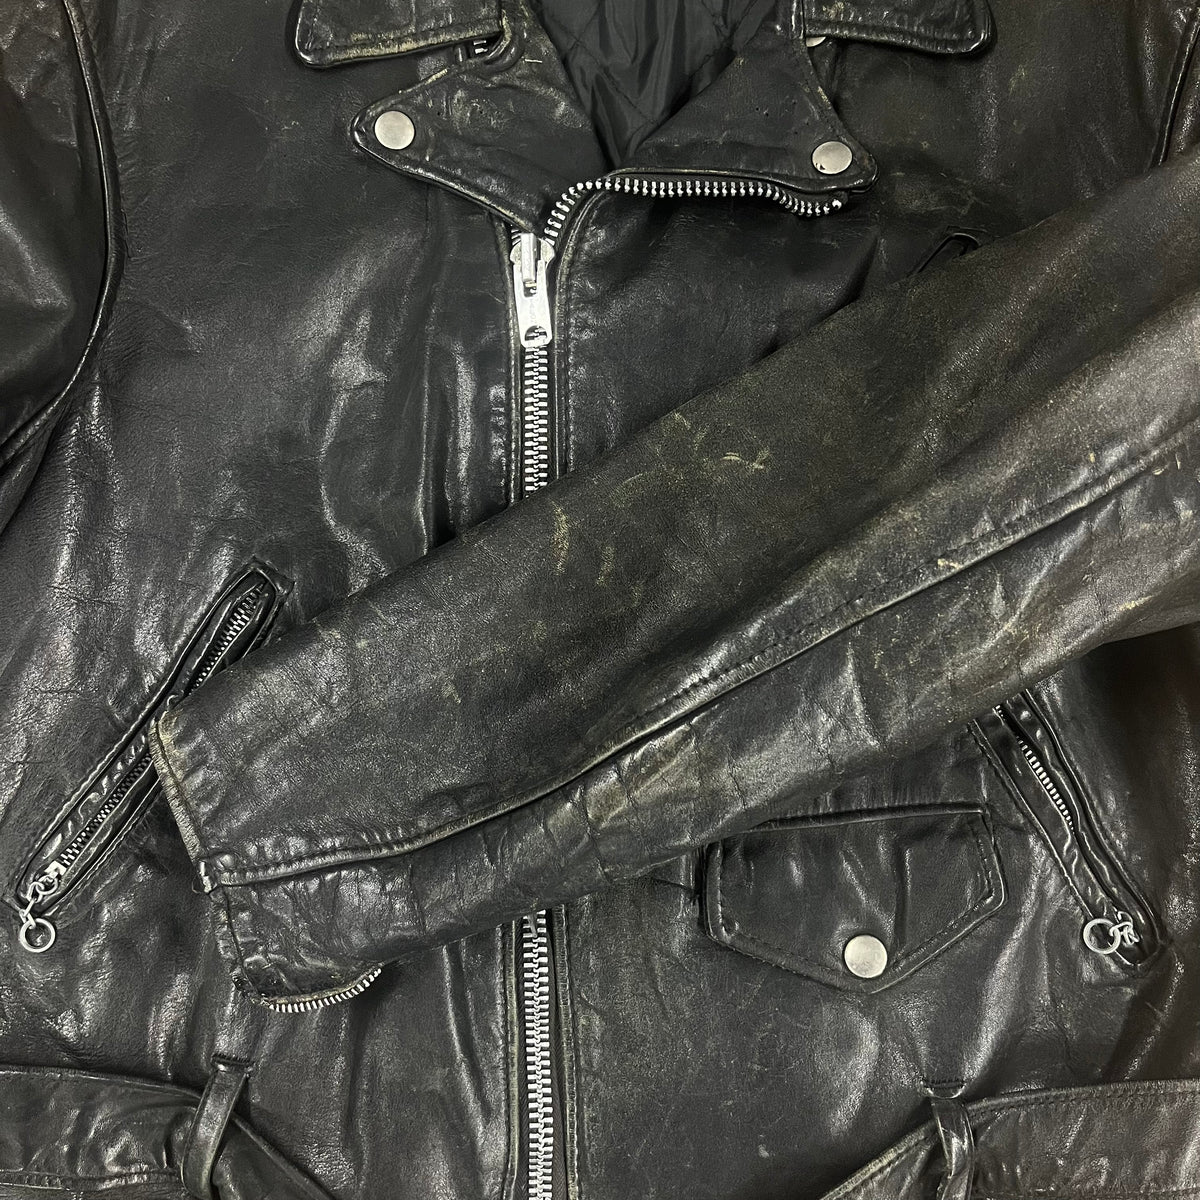 Vintage Schott Perfecto Made in U.S.A. Leather Motorcycle Jacket